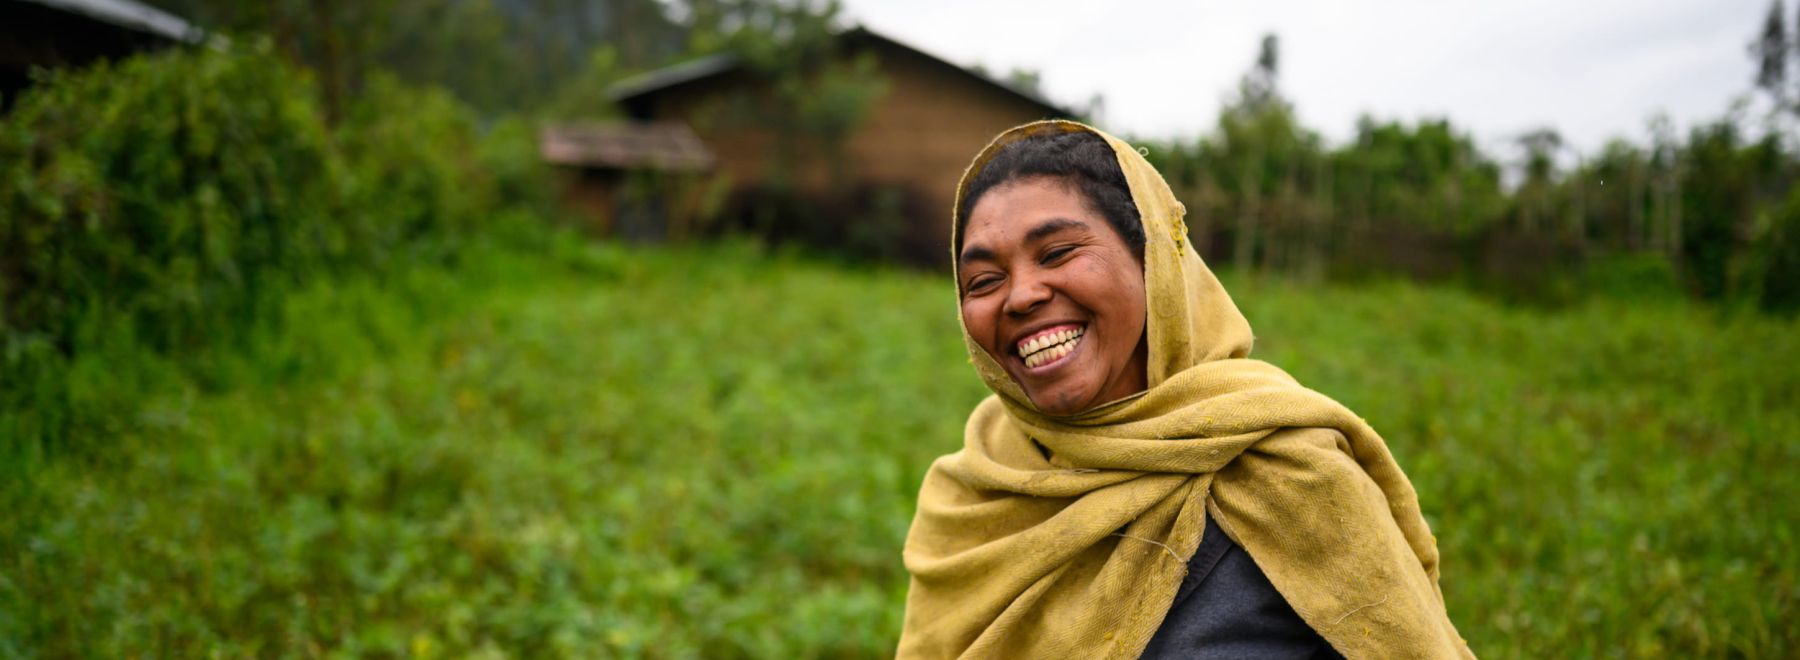 A farmer in Ethiopia laughs as she poses for a photo in front of her new tree seedlings